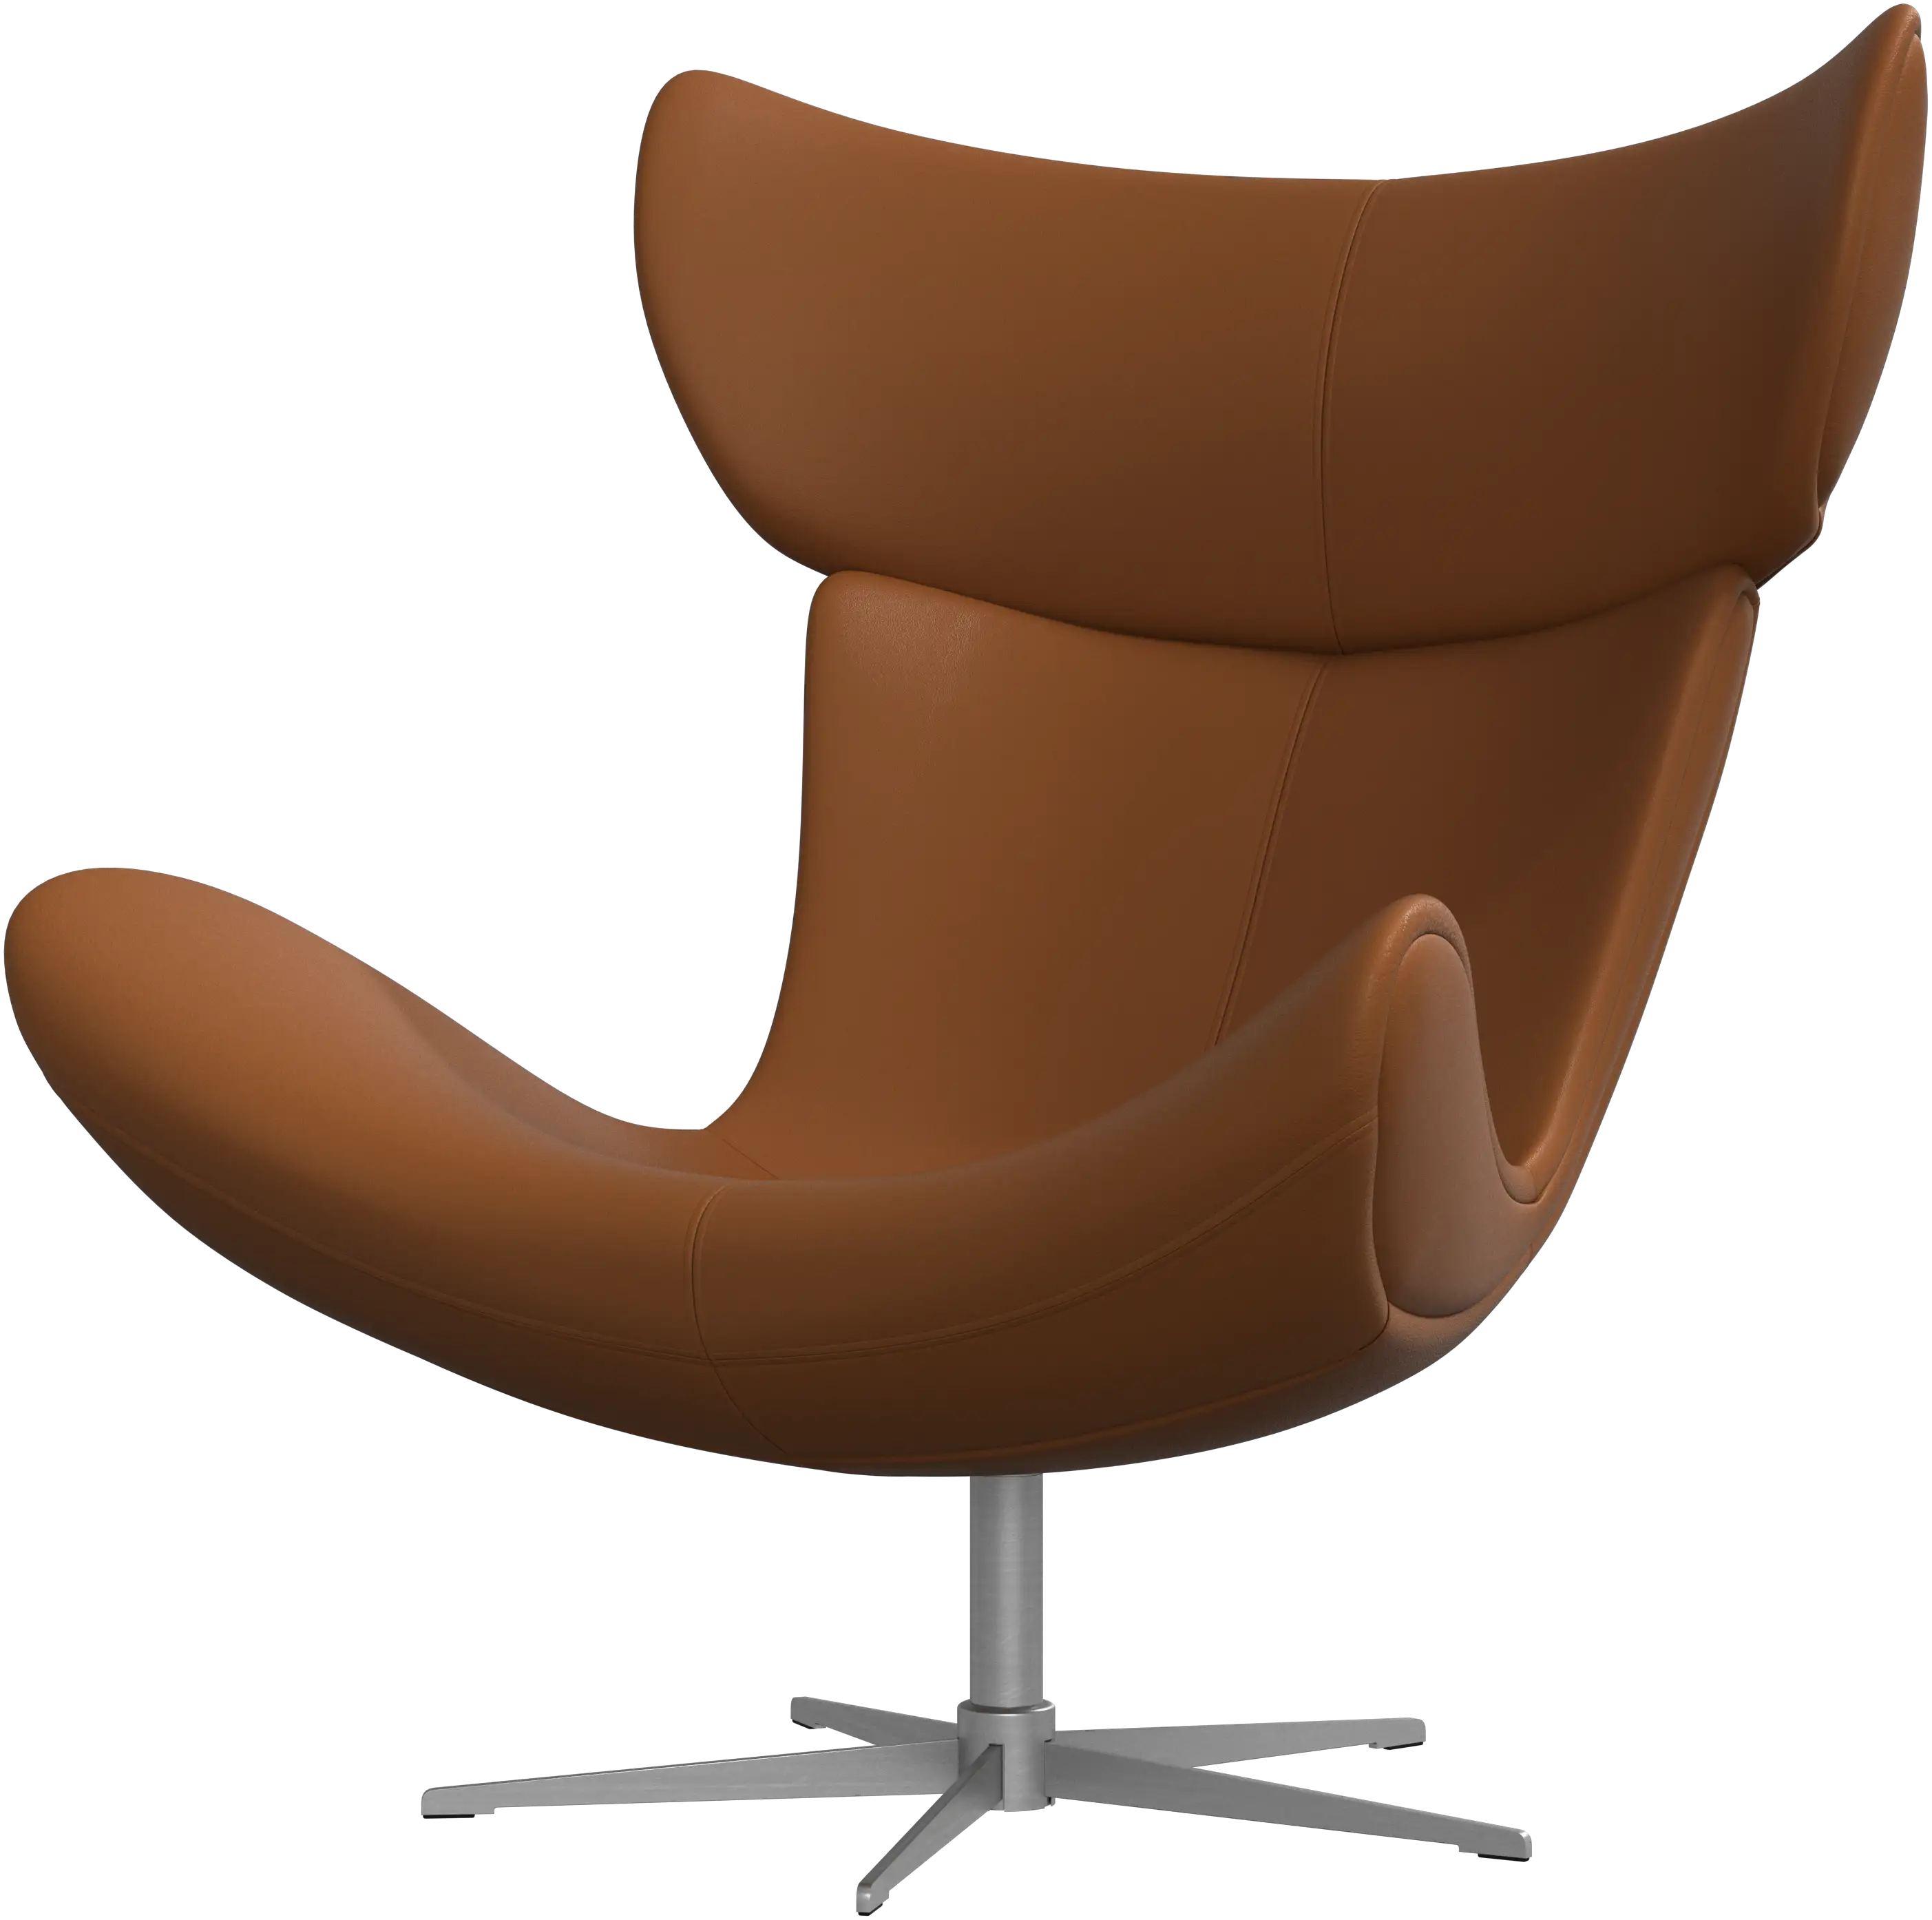 Imola chair with swivel function